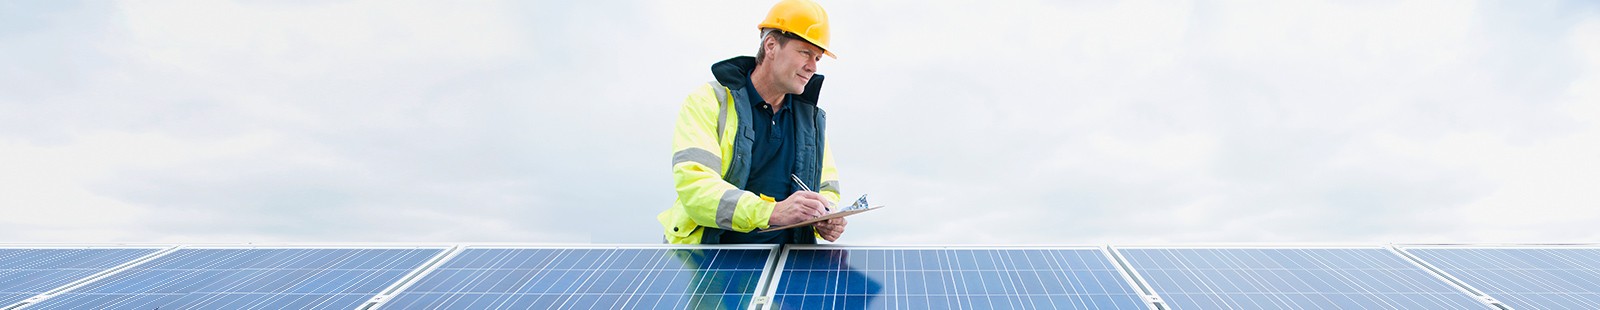 Worker with clipboard checking solar panels